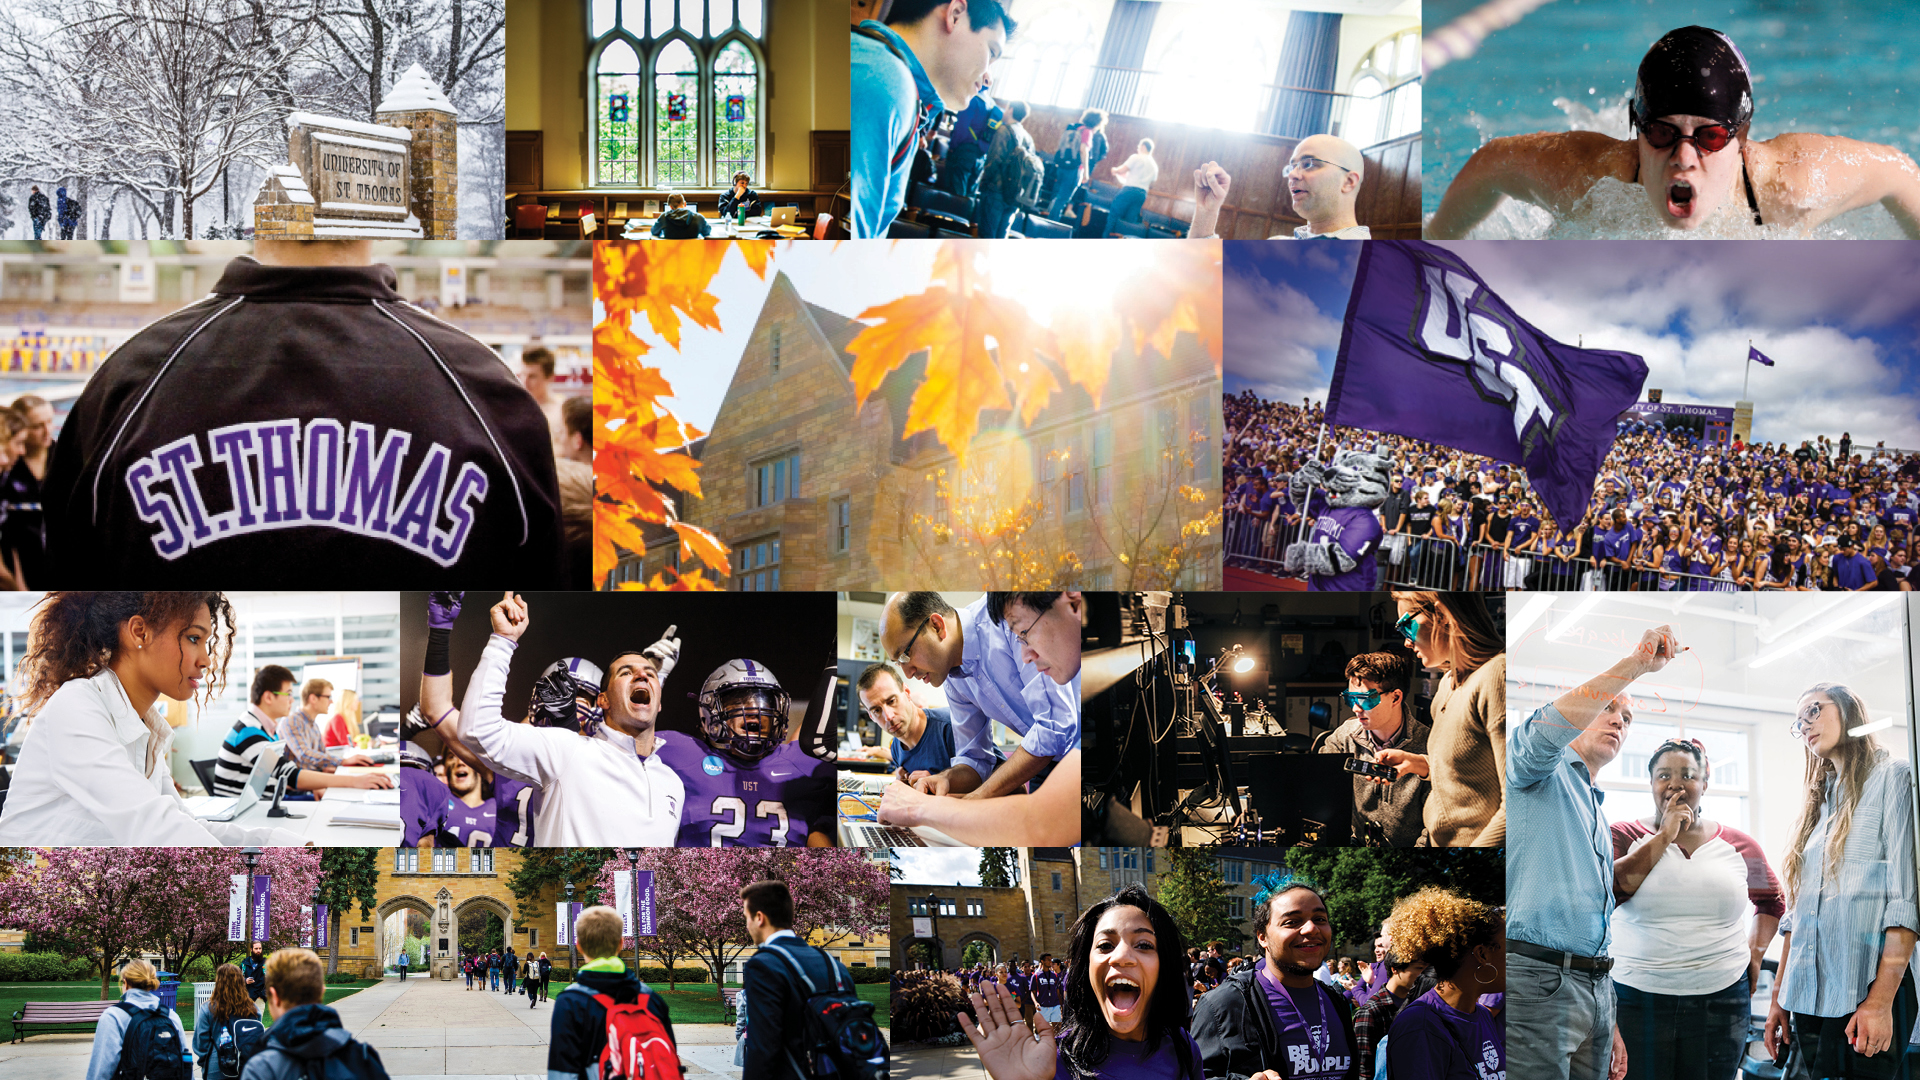 collage of various images taken on the St. Thomas campus